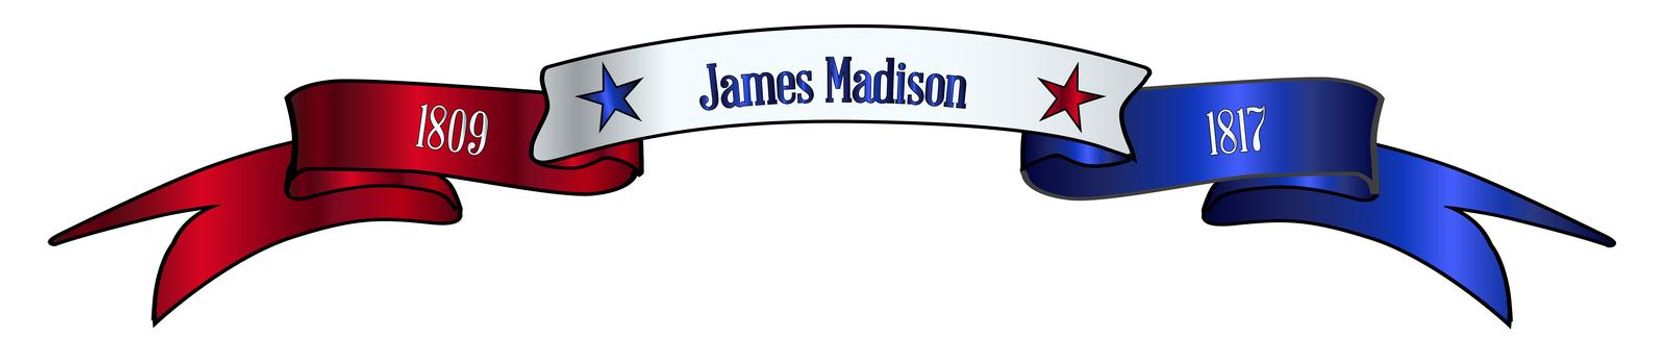 A red white and blue satin or silk ribbon banner with the text James Madison and stars and date in office